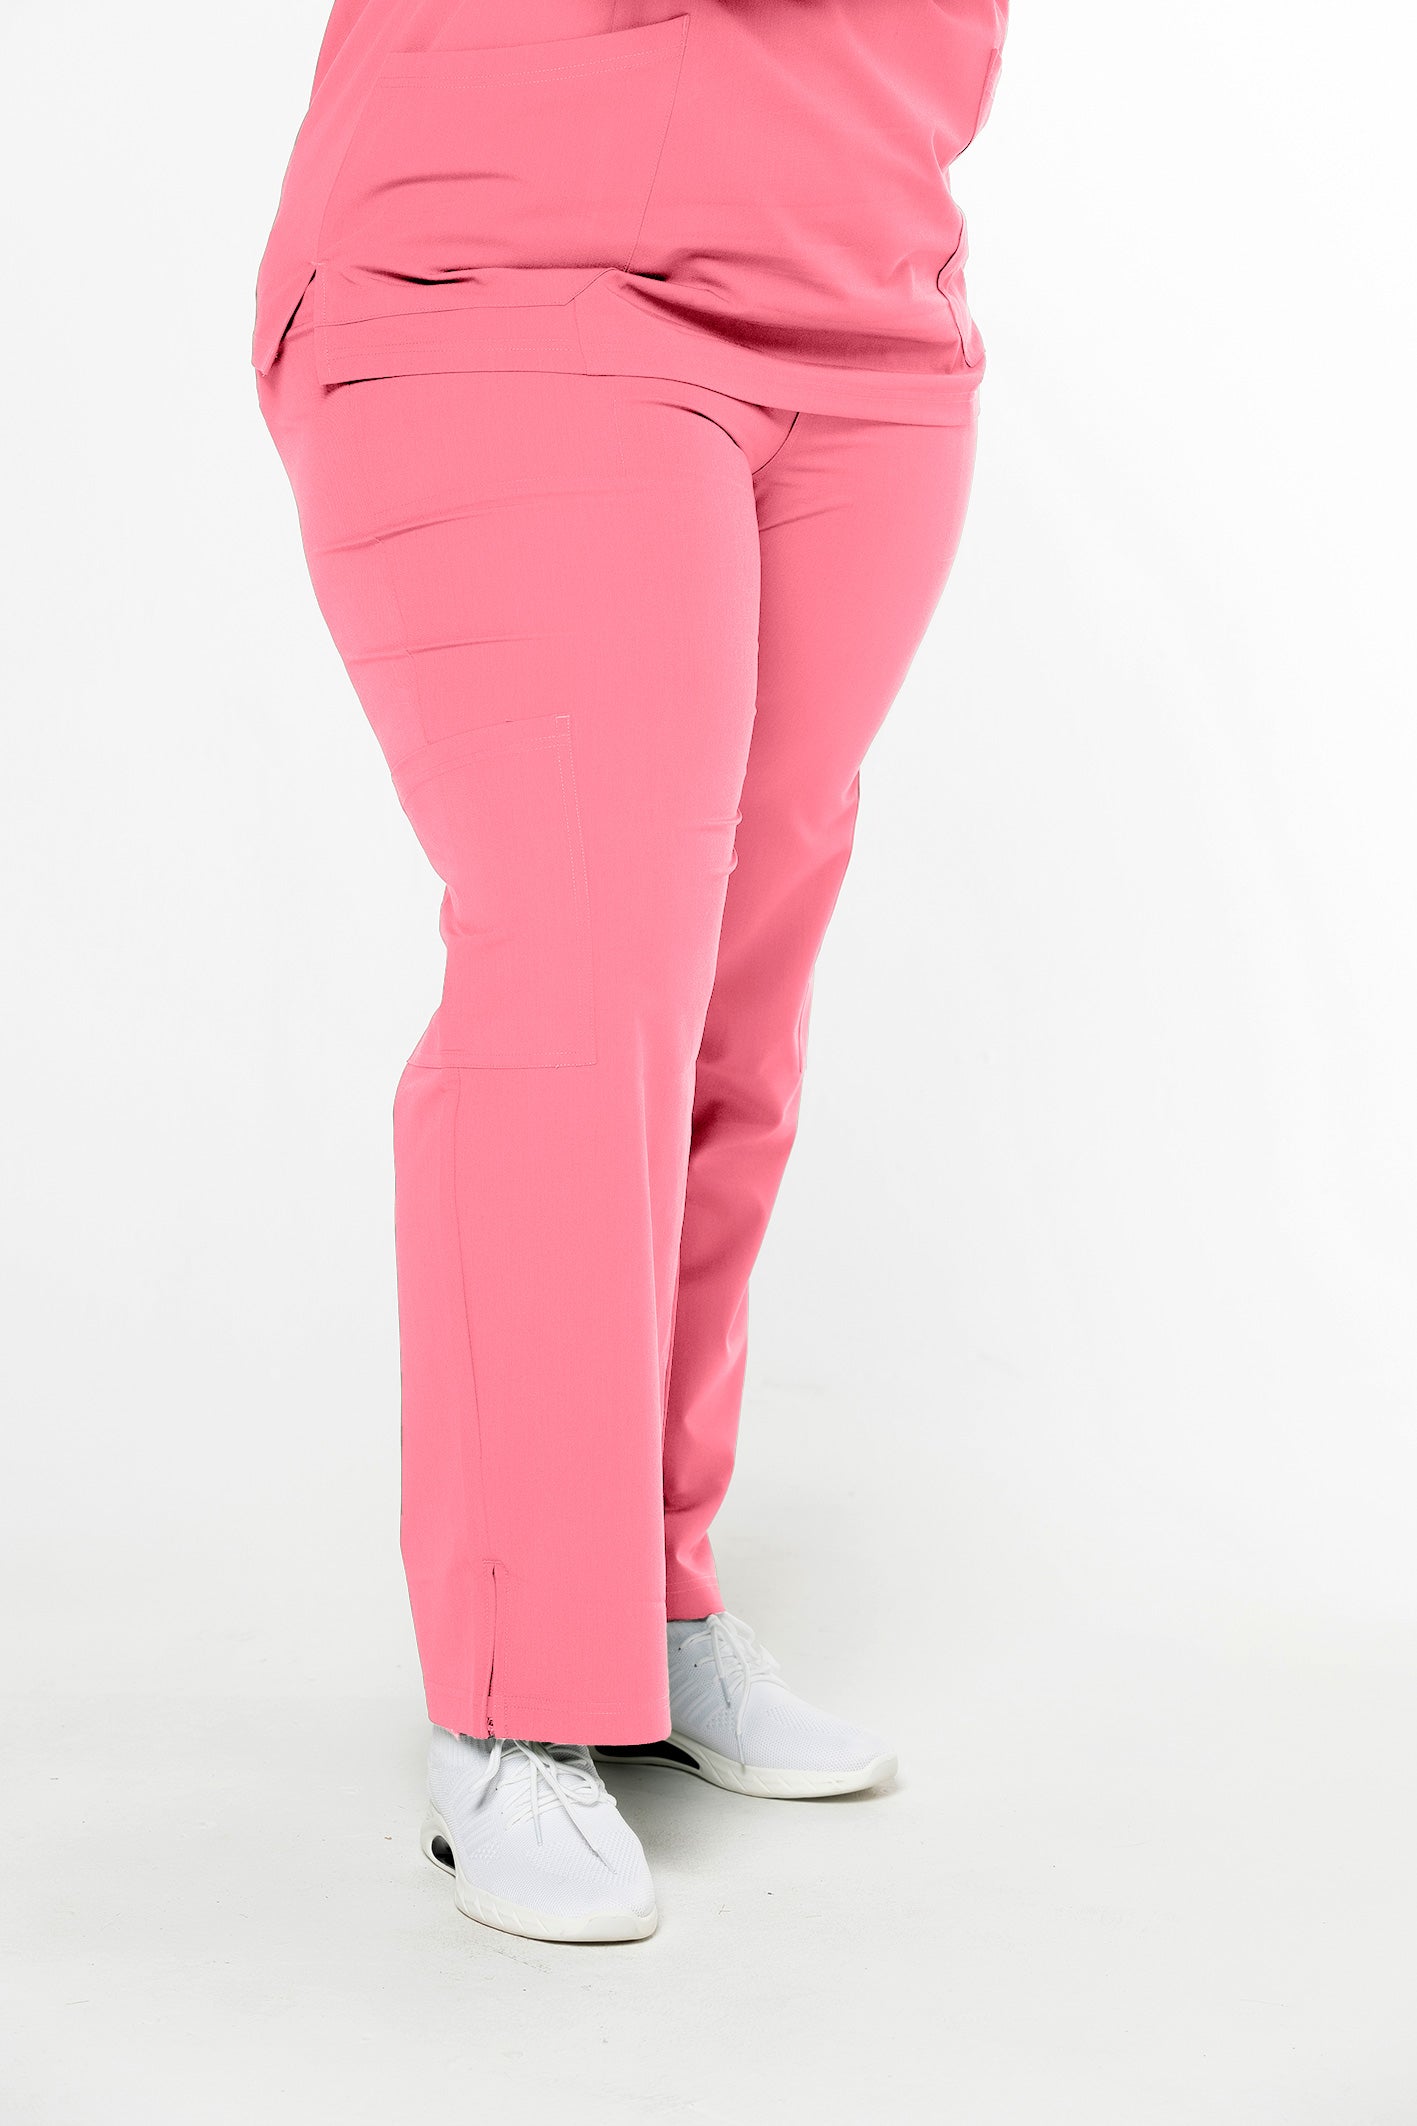 CSCRUBS CLASSIC COLLECTION STRAIGHT LEG PANT | CLASSIC WP1 (SIZE: PETITE & TALL)